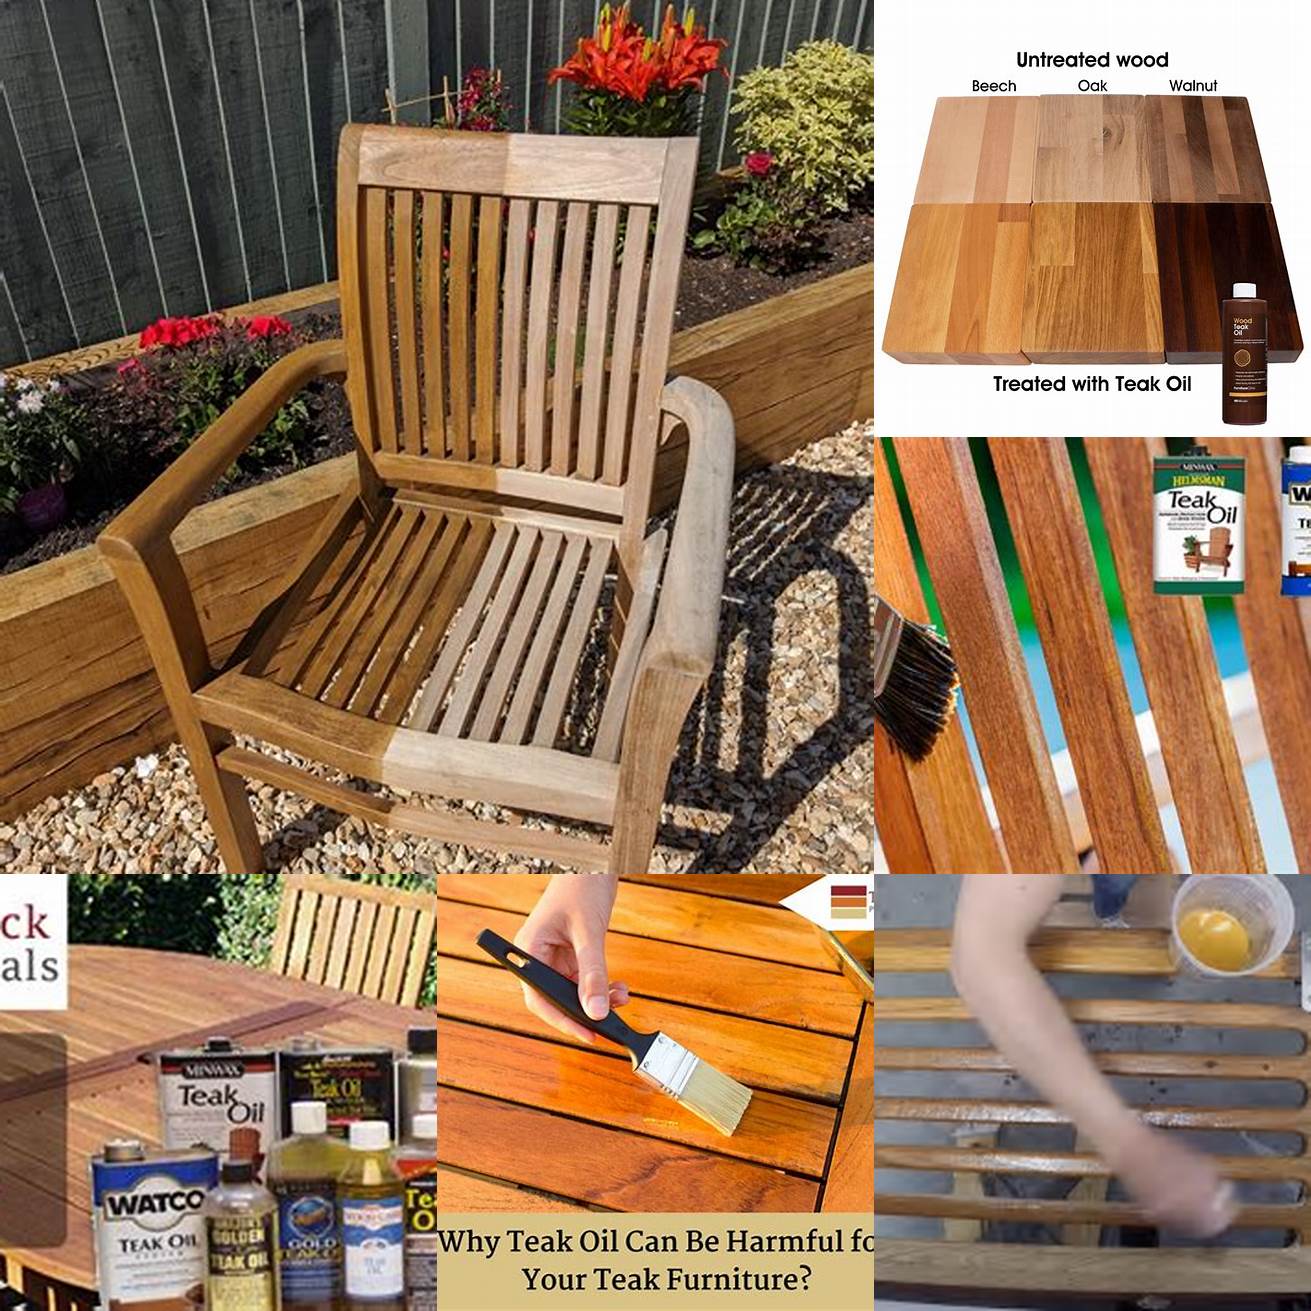 Using Natural Oils to Protect Your Teak Furniture